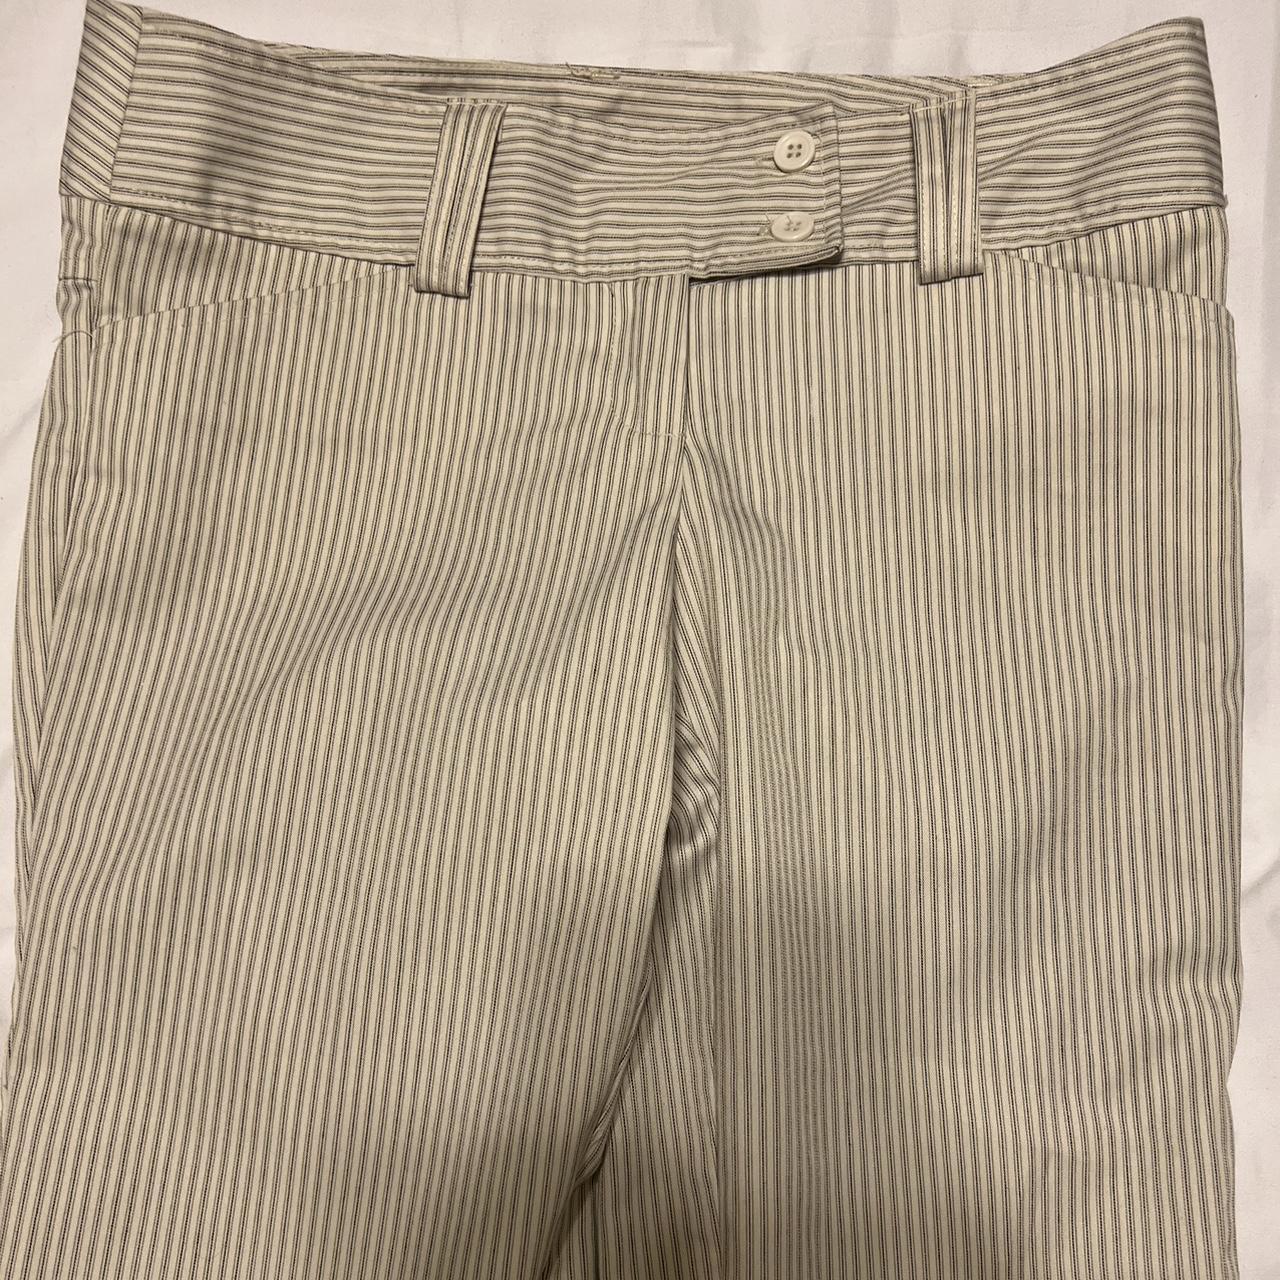 Evans Women's White and Black Trousers (4)